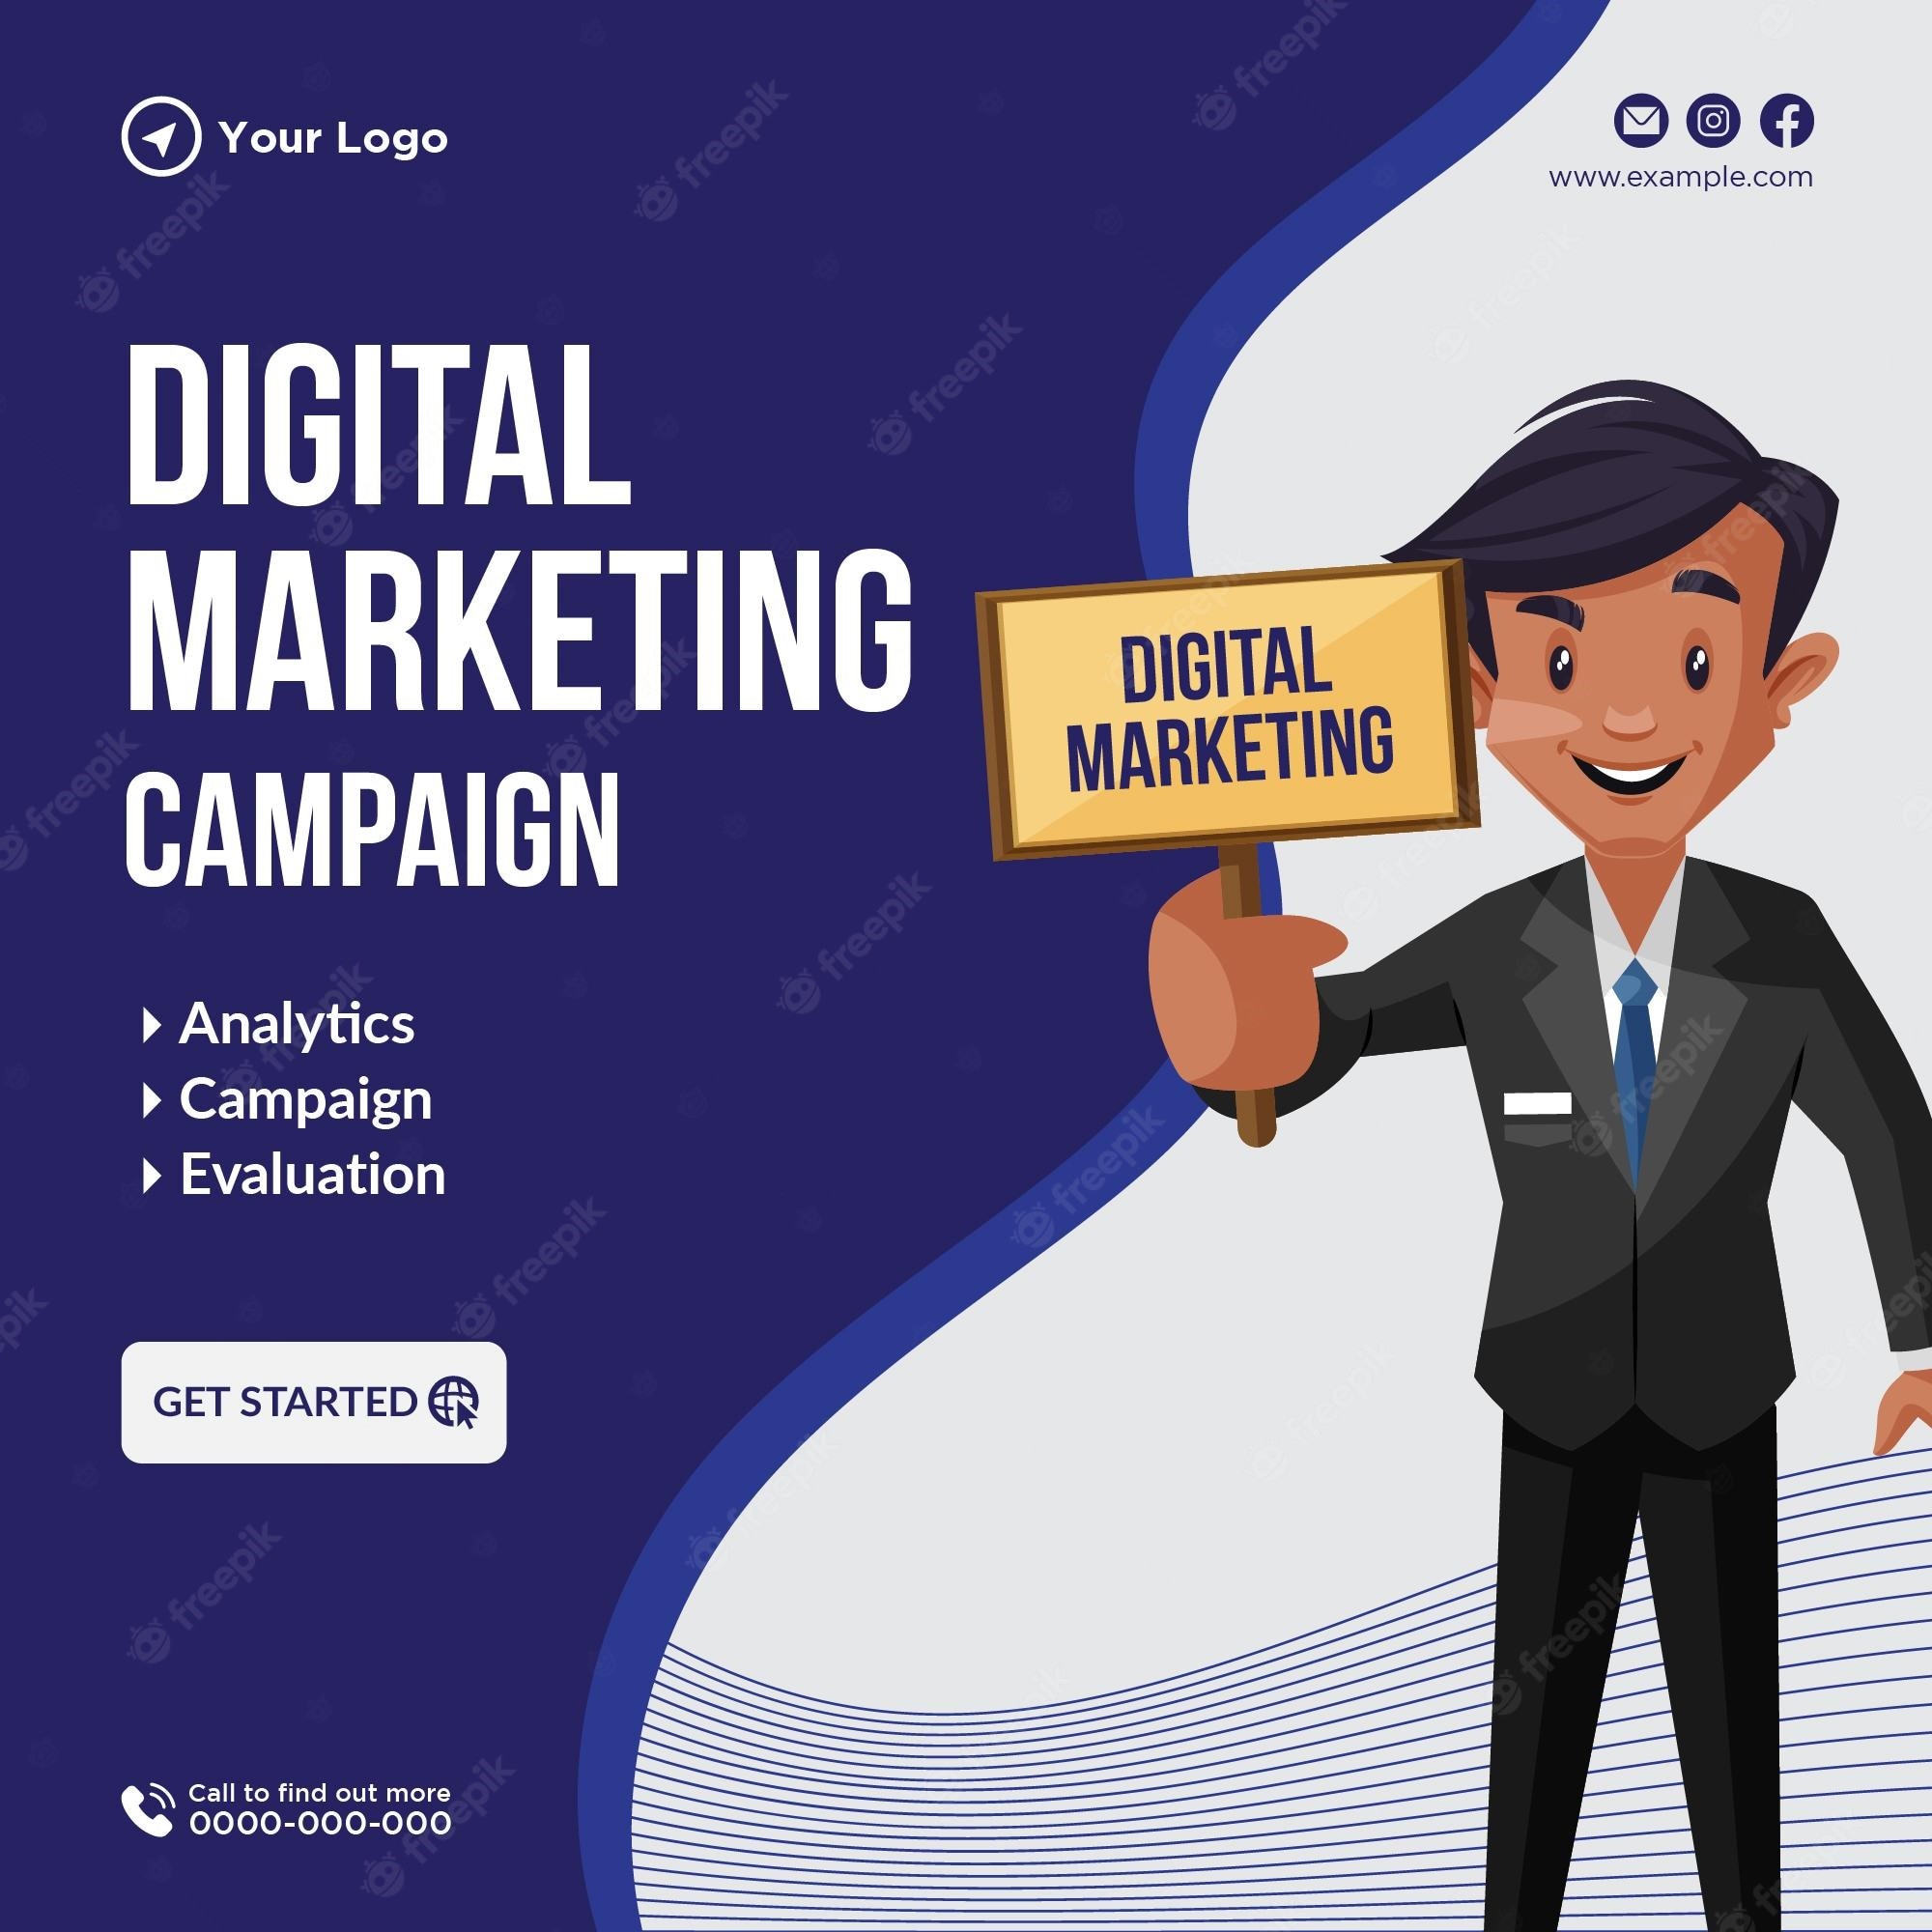 Boost Your ROI with CVR: The Key to Successful Digital Marketing Campaigns